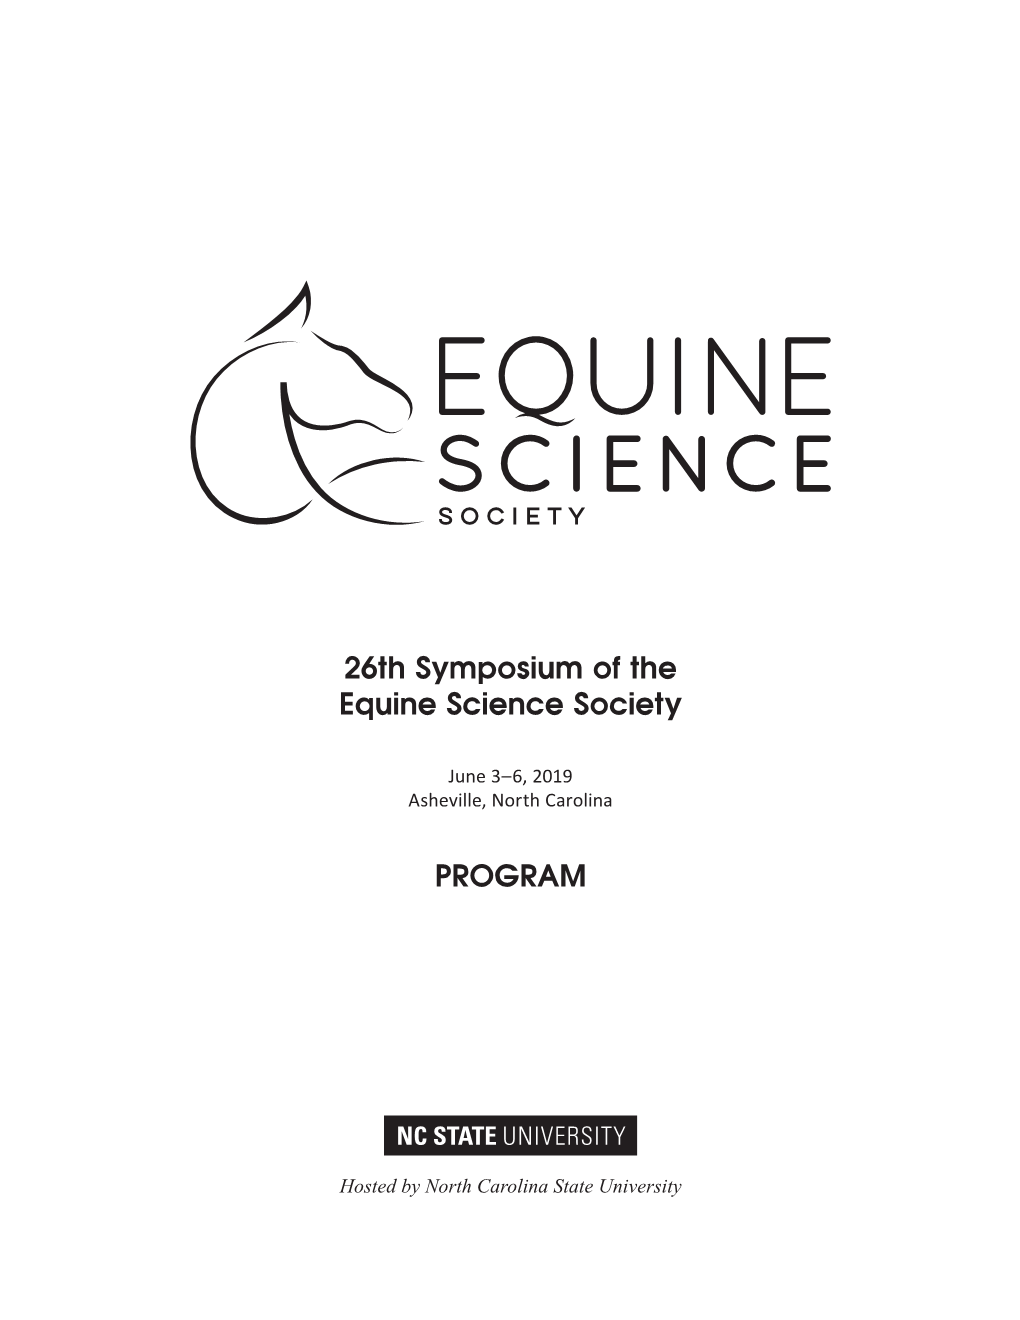 26Th Symposium of the Equine Science Society PROGRAM